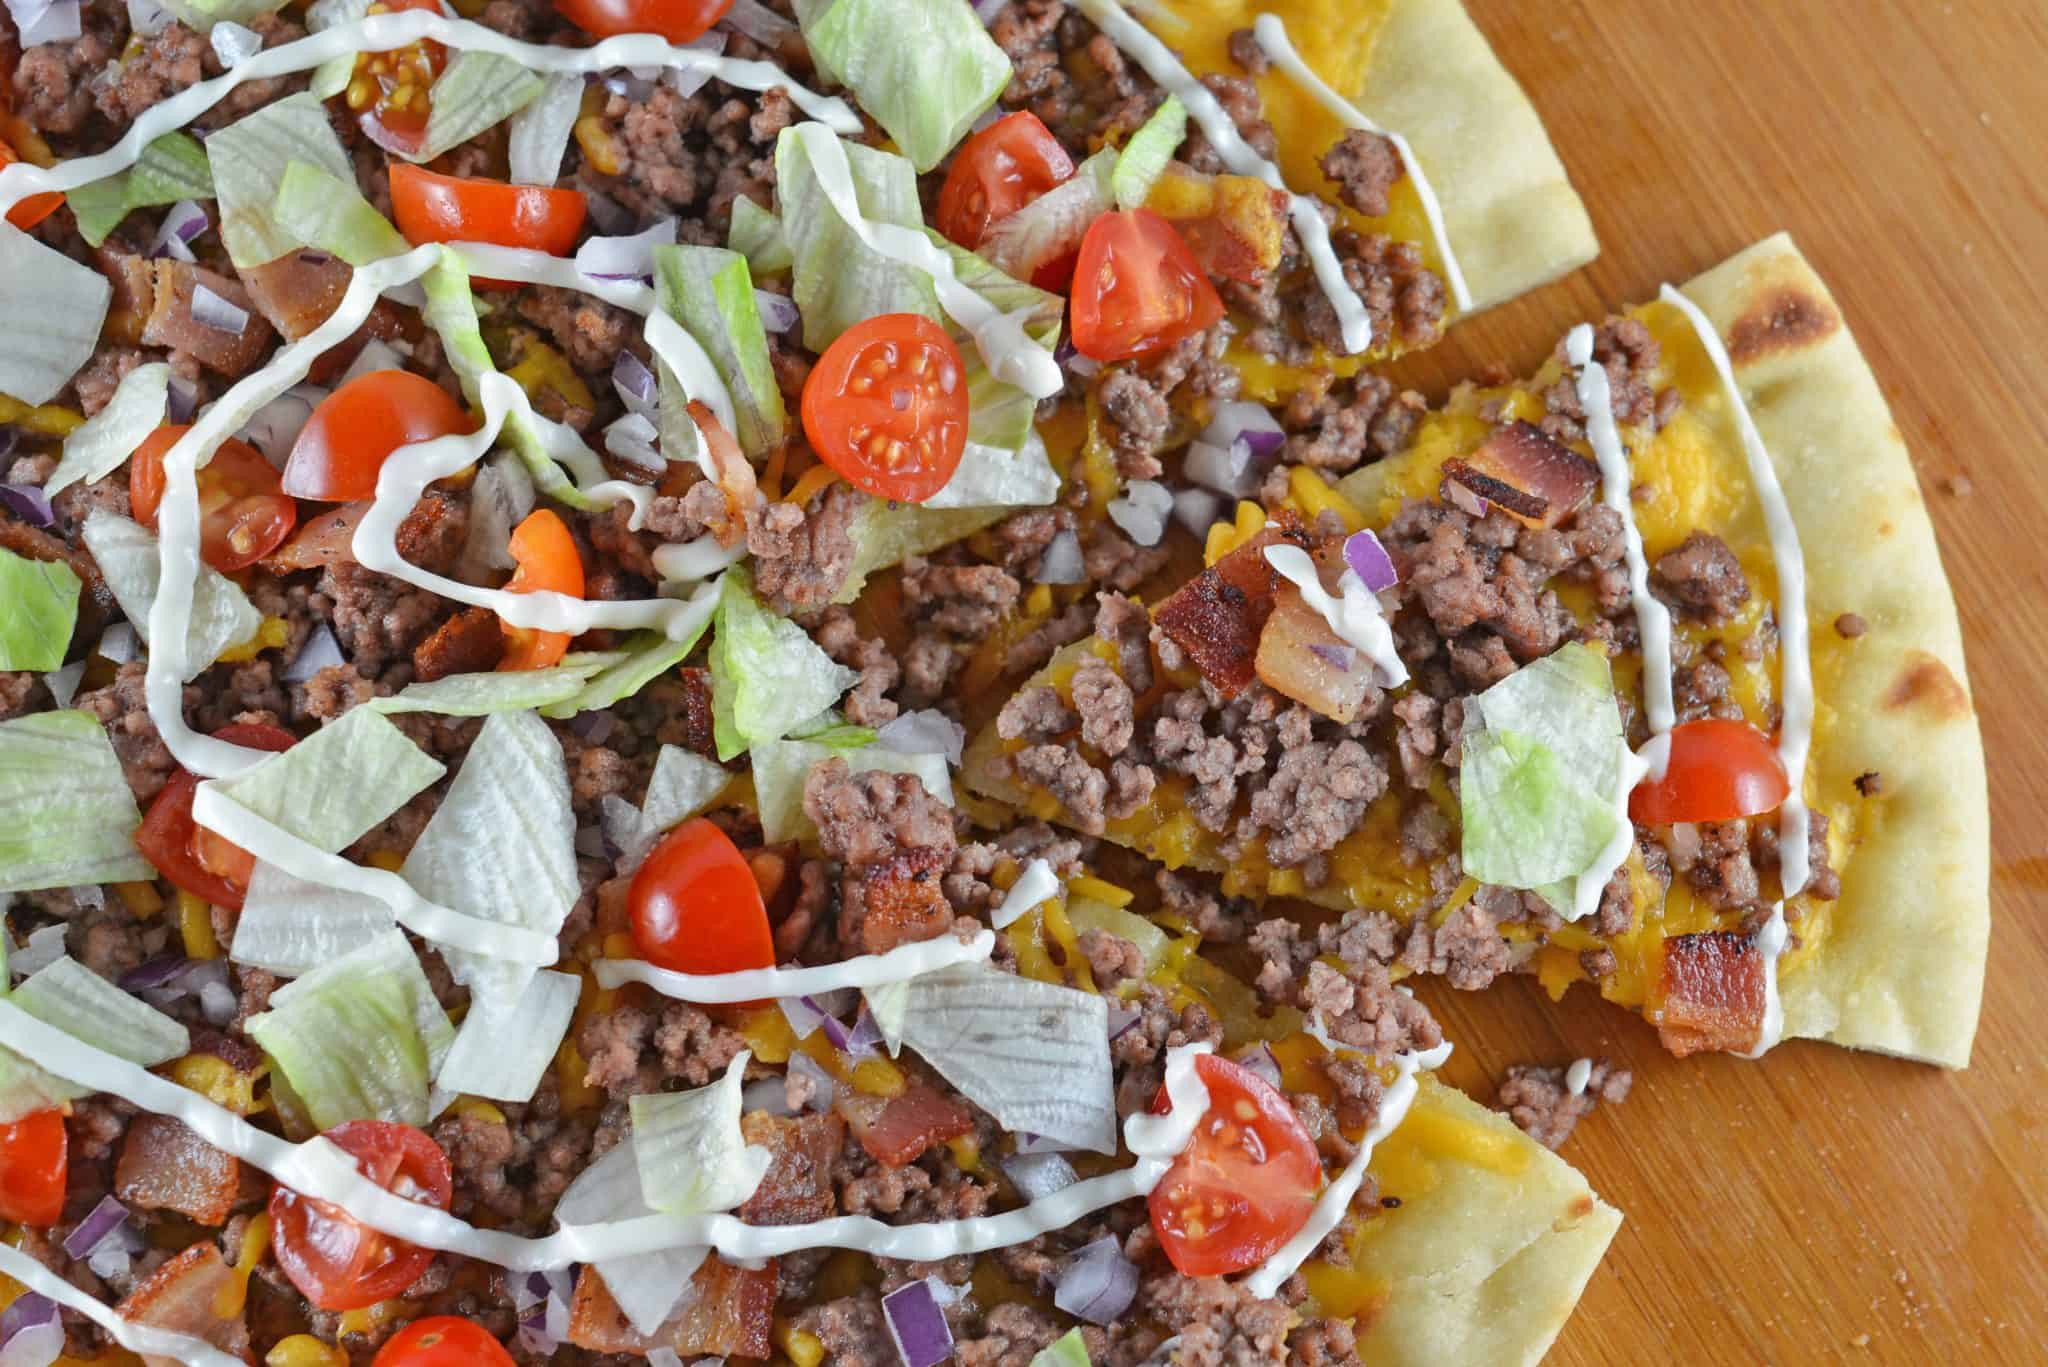 What happens when you take two favorites and mash them together? The best pizza ever! Cheeseburger Pizza! #homemadepizza #cheeseburgerpizza www.savoryexperiments.com